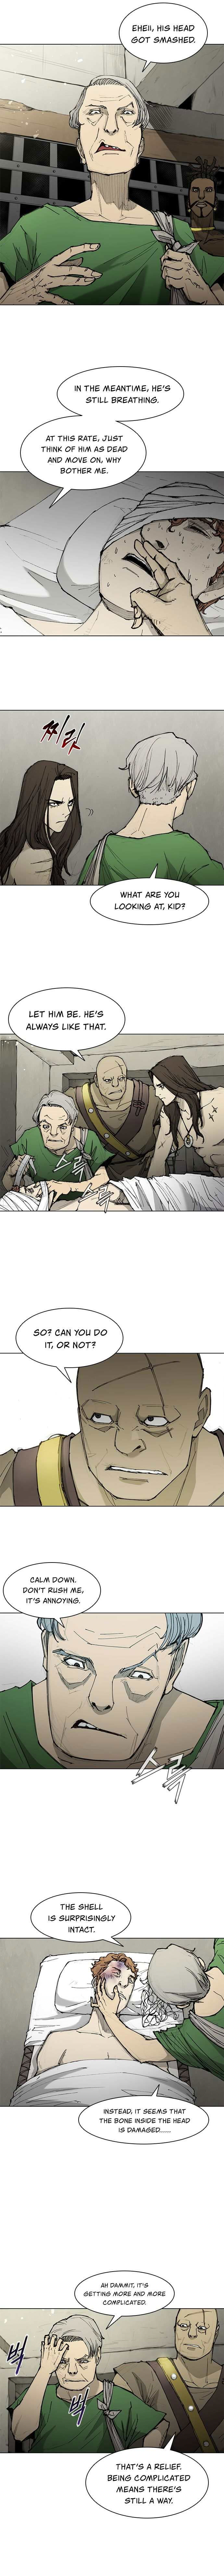 The Long Way of the Warrior Chapter 46 page 2